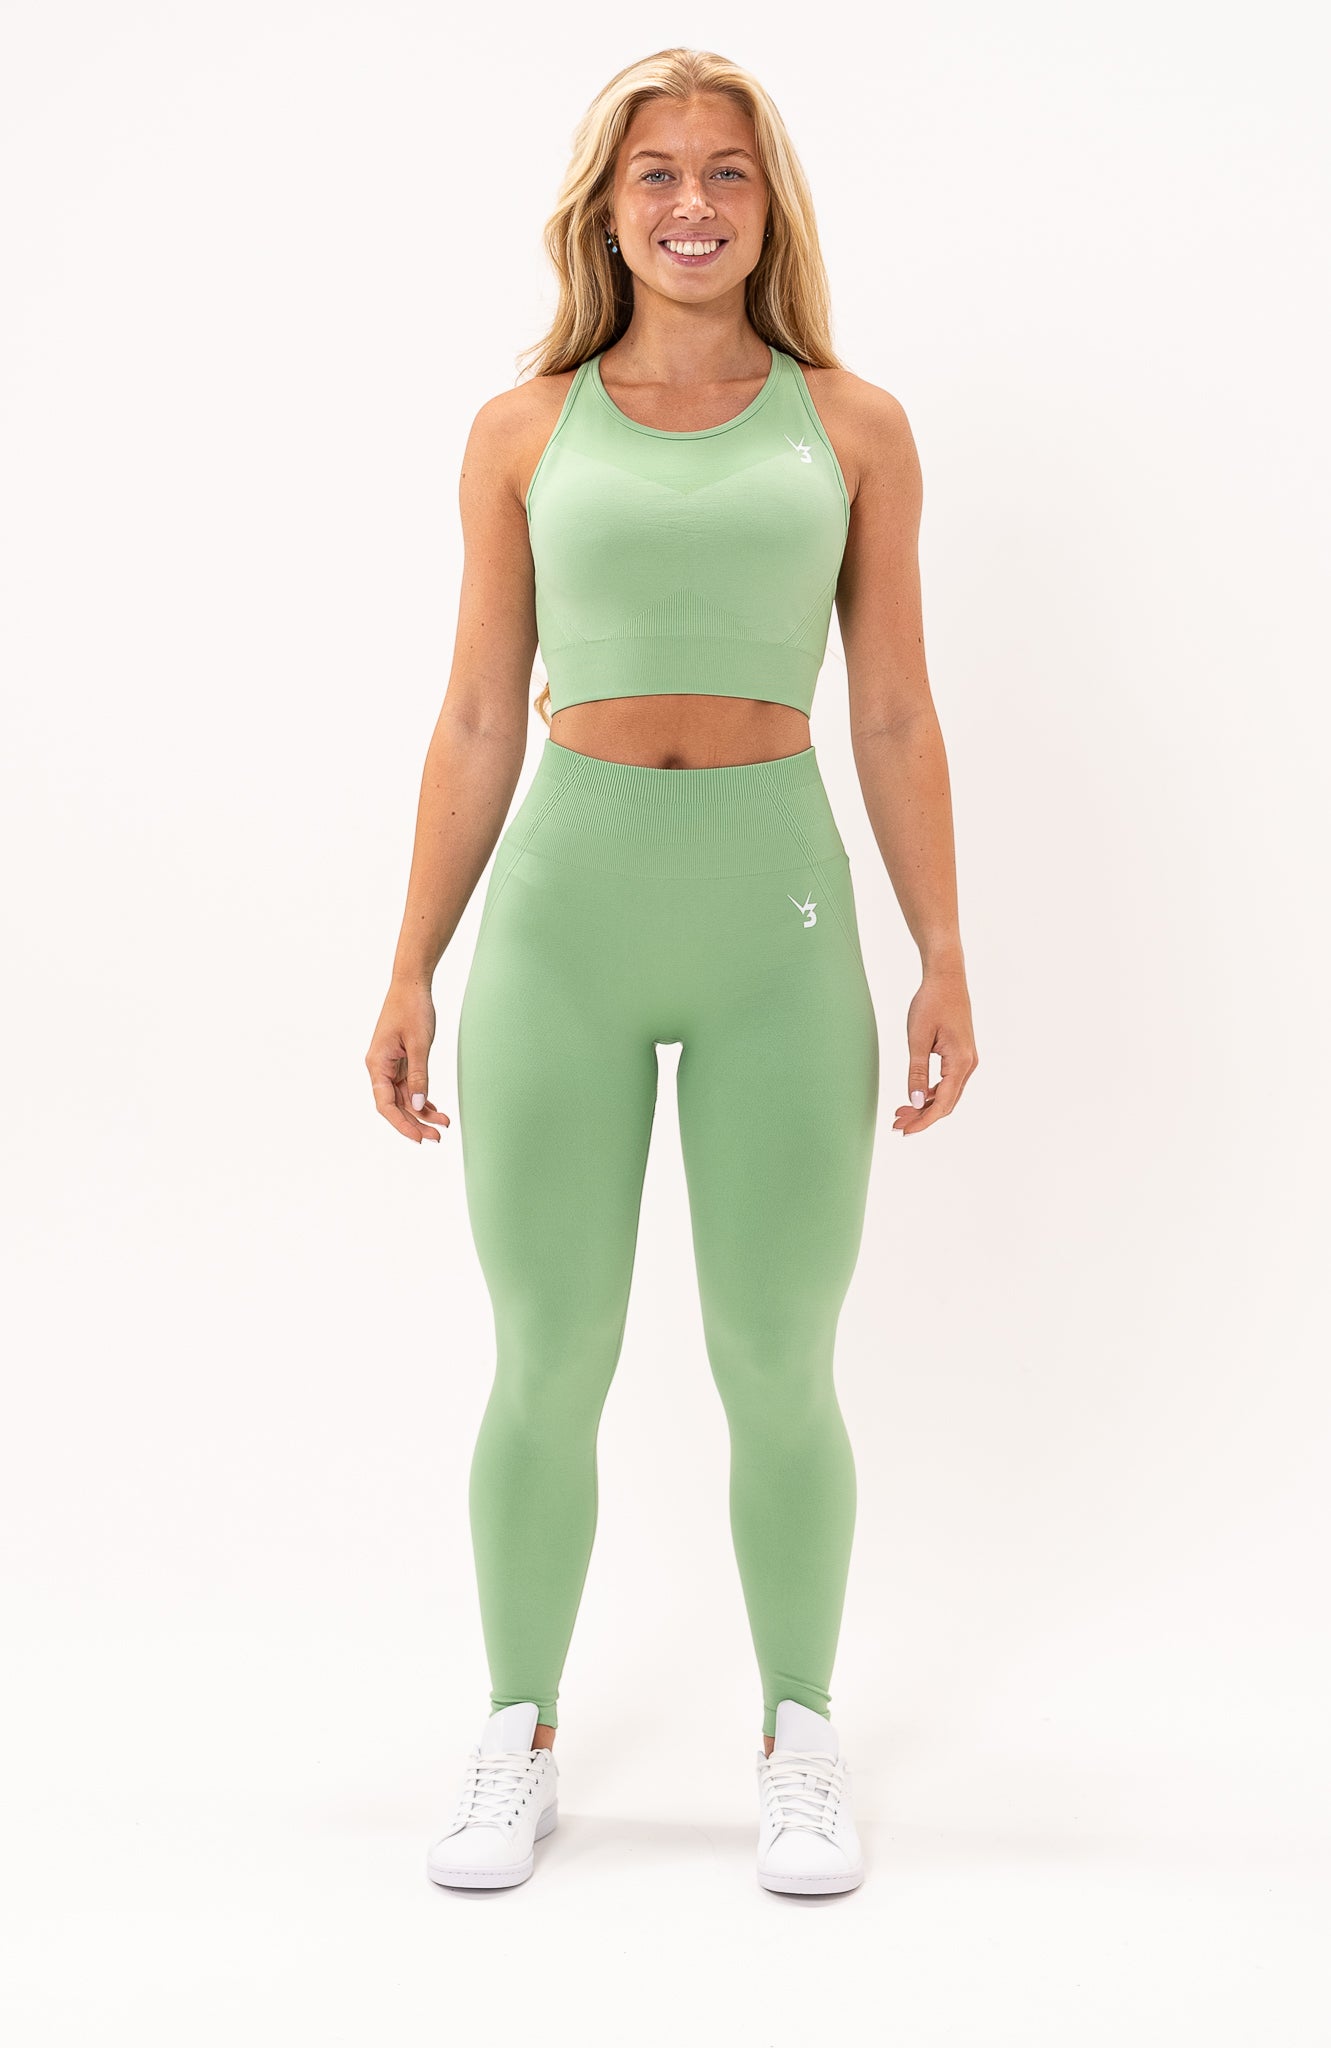 redbaysand Women's Tempo seamless scrunch bum shaping high waisted leggings and training sports bra in mint green – Squat proof sports tights and training bra for Gym workouts training, Running, yoga, bodybuilding and bikini fitness.